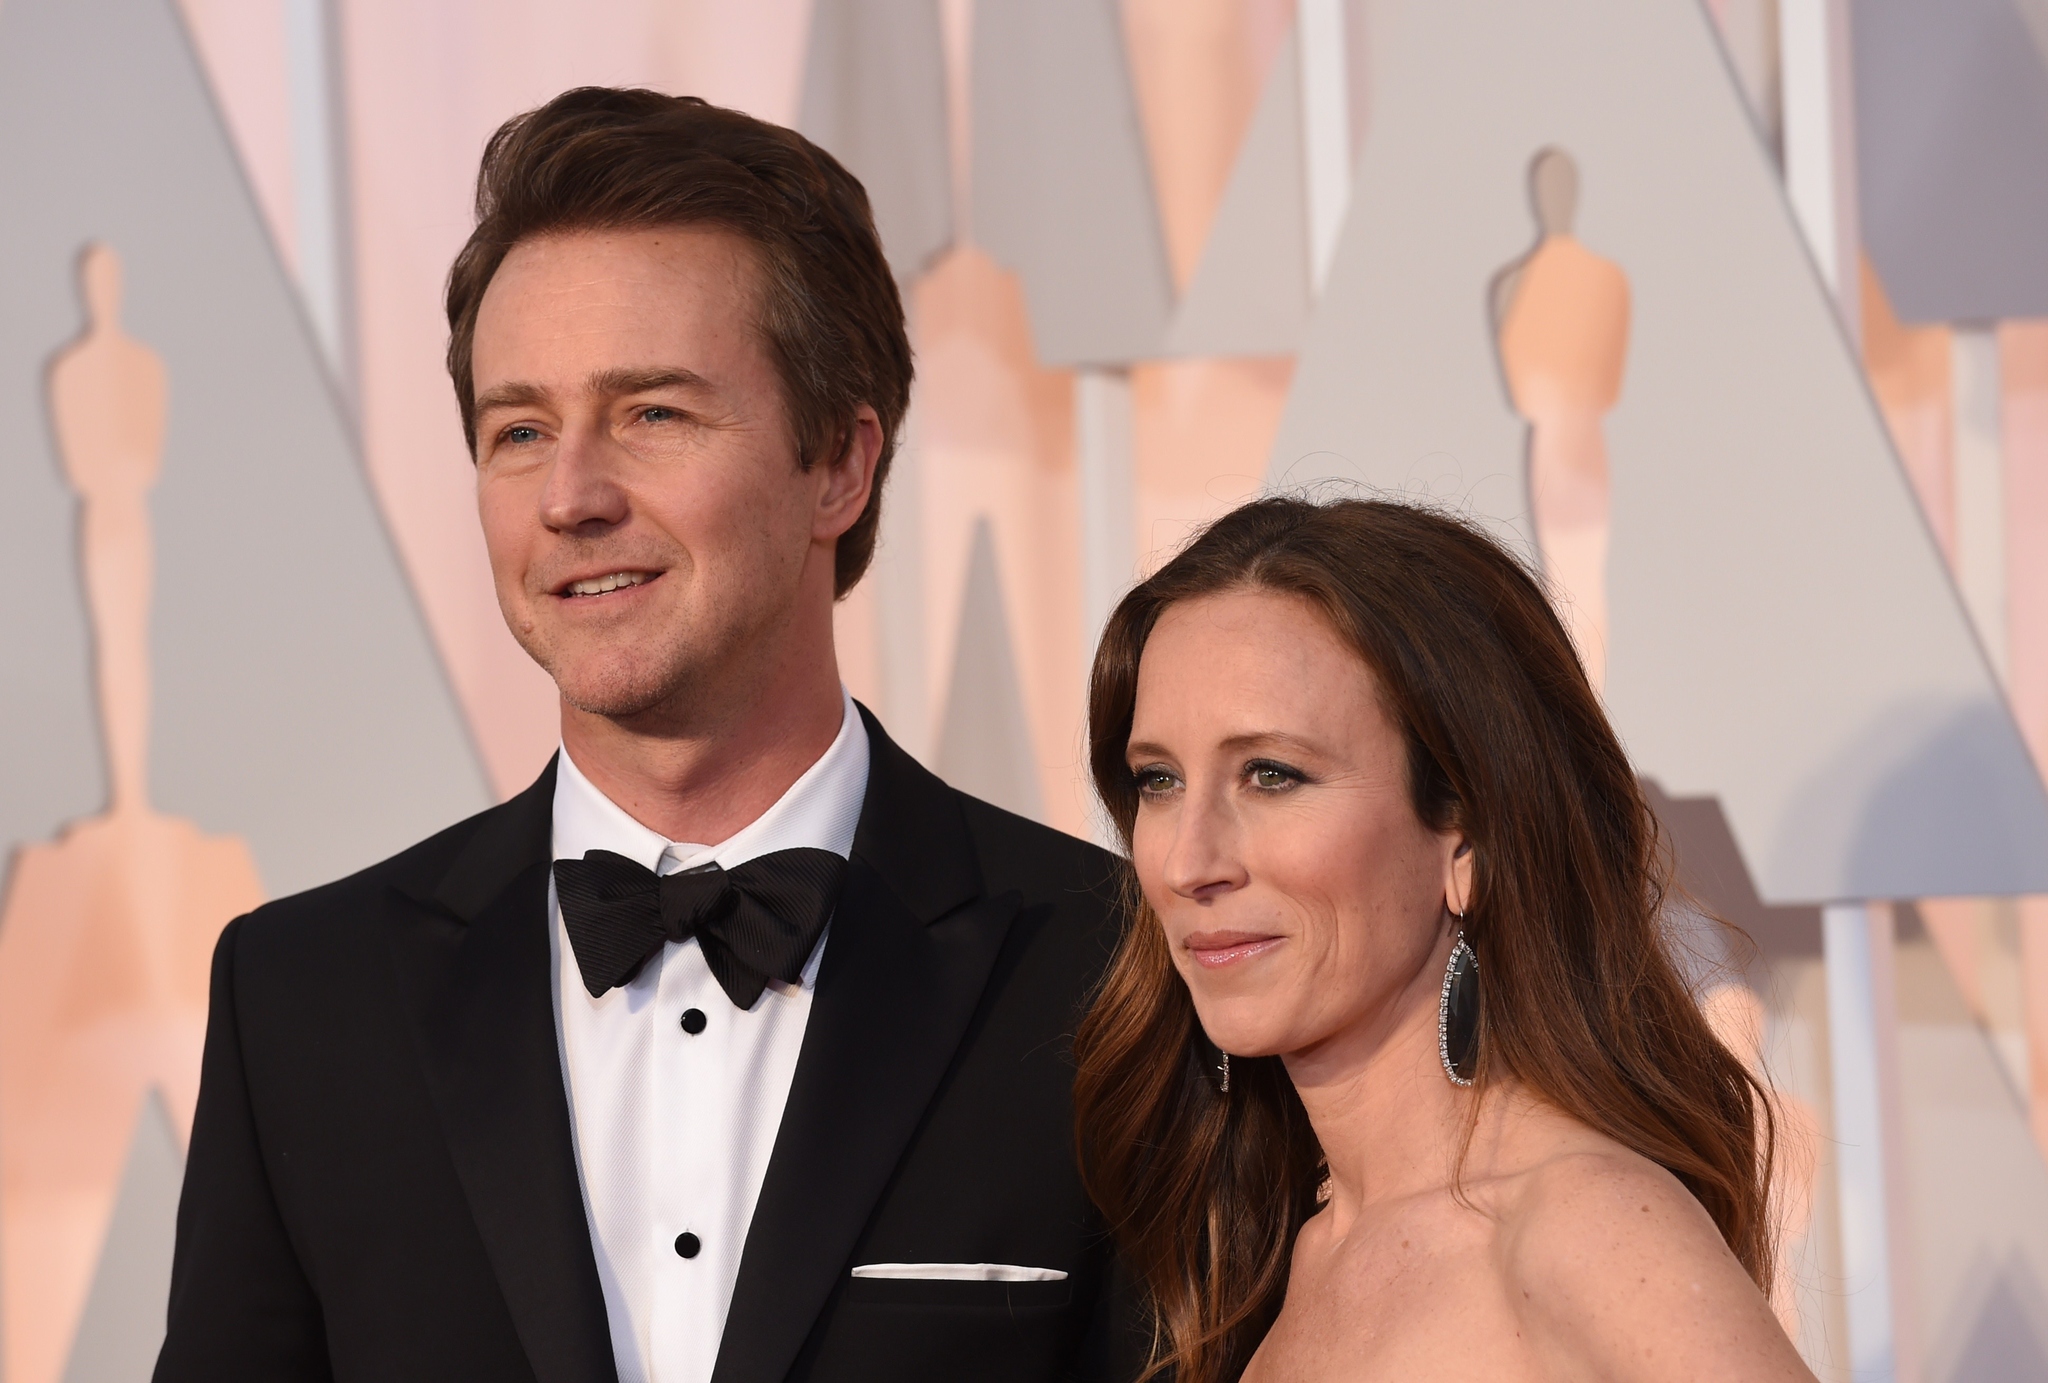 Edward Norton at event of The Oscars (2015)